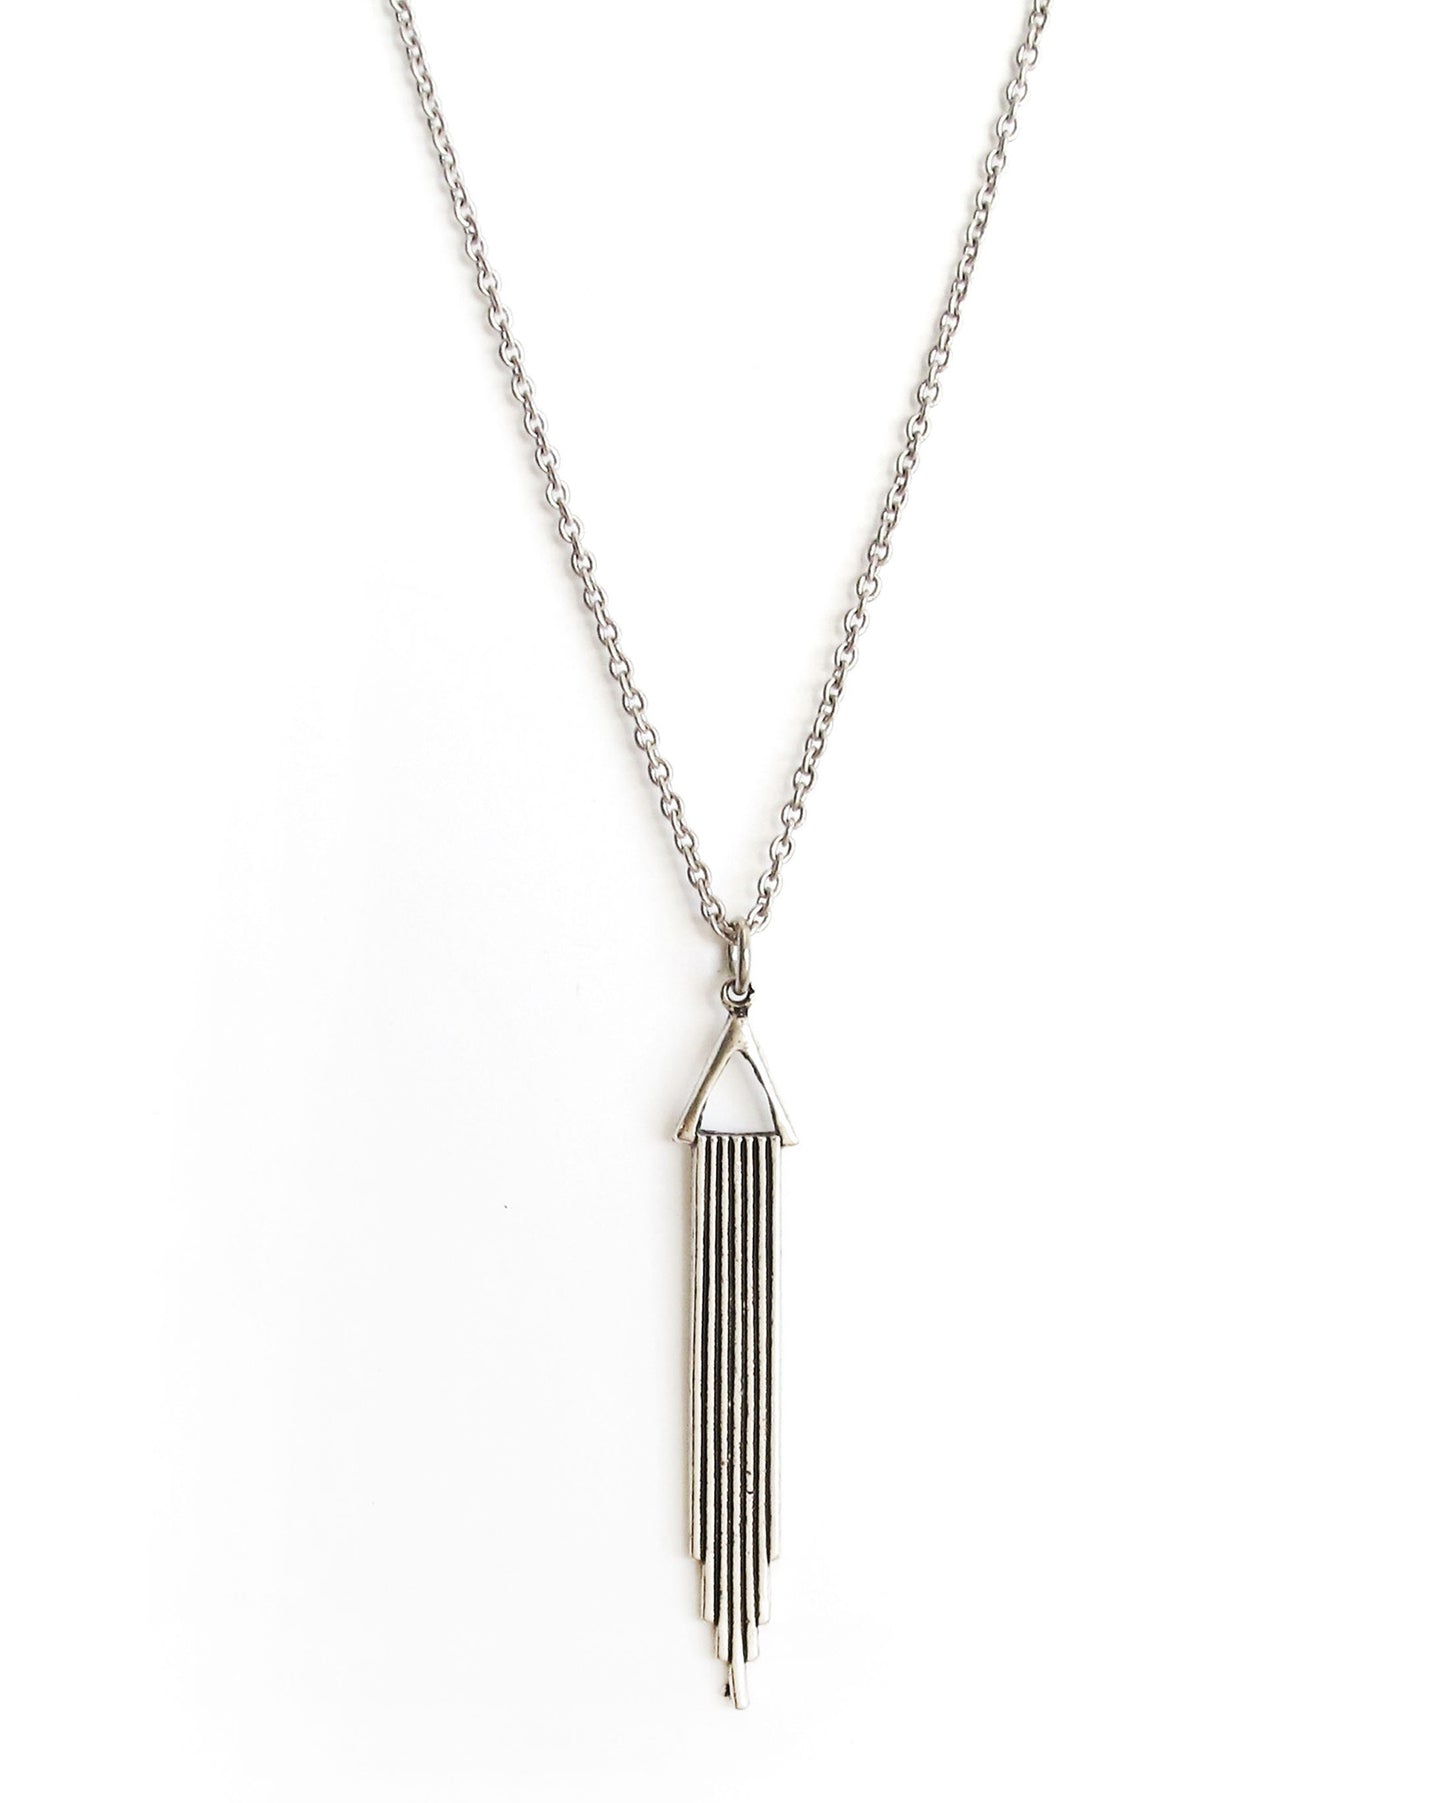 Art Deco Waterfall Necklace